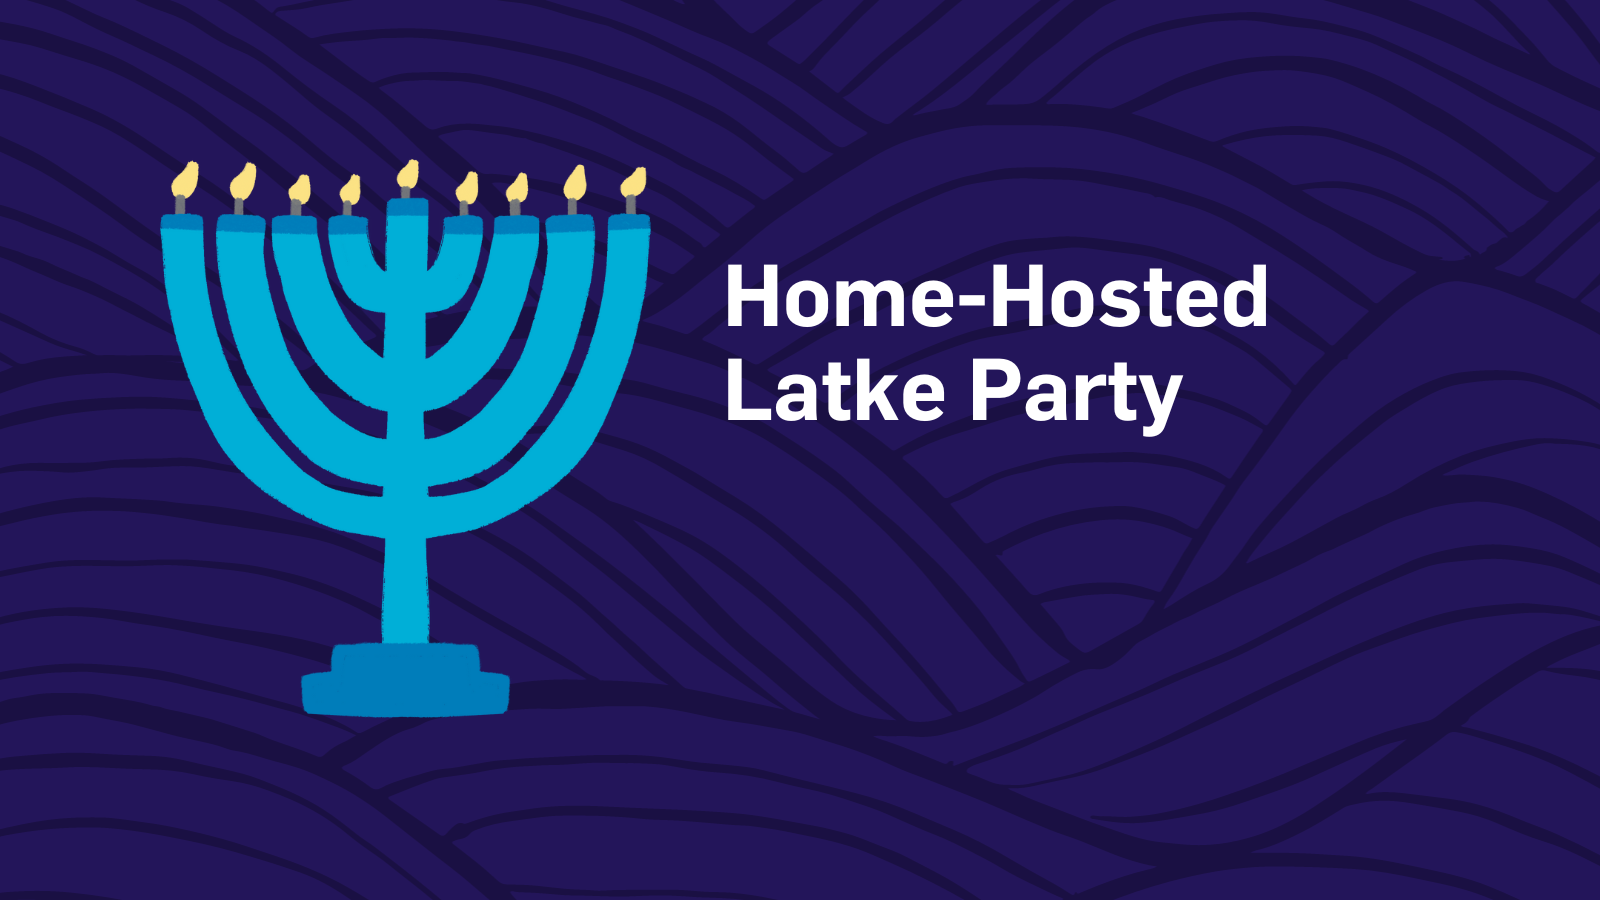 Home-Hosted Latke Party